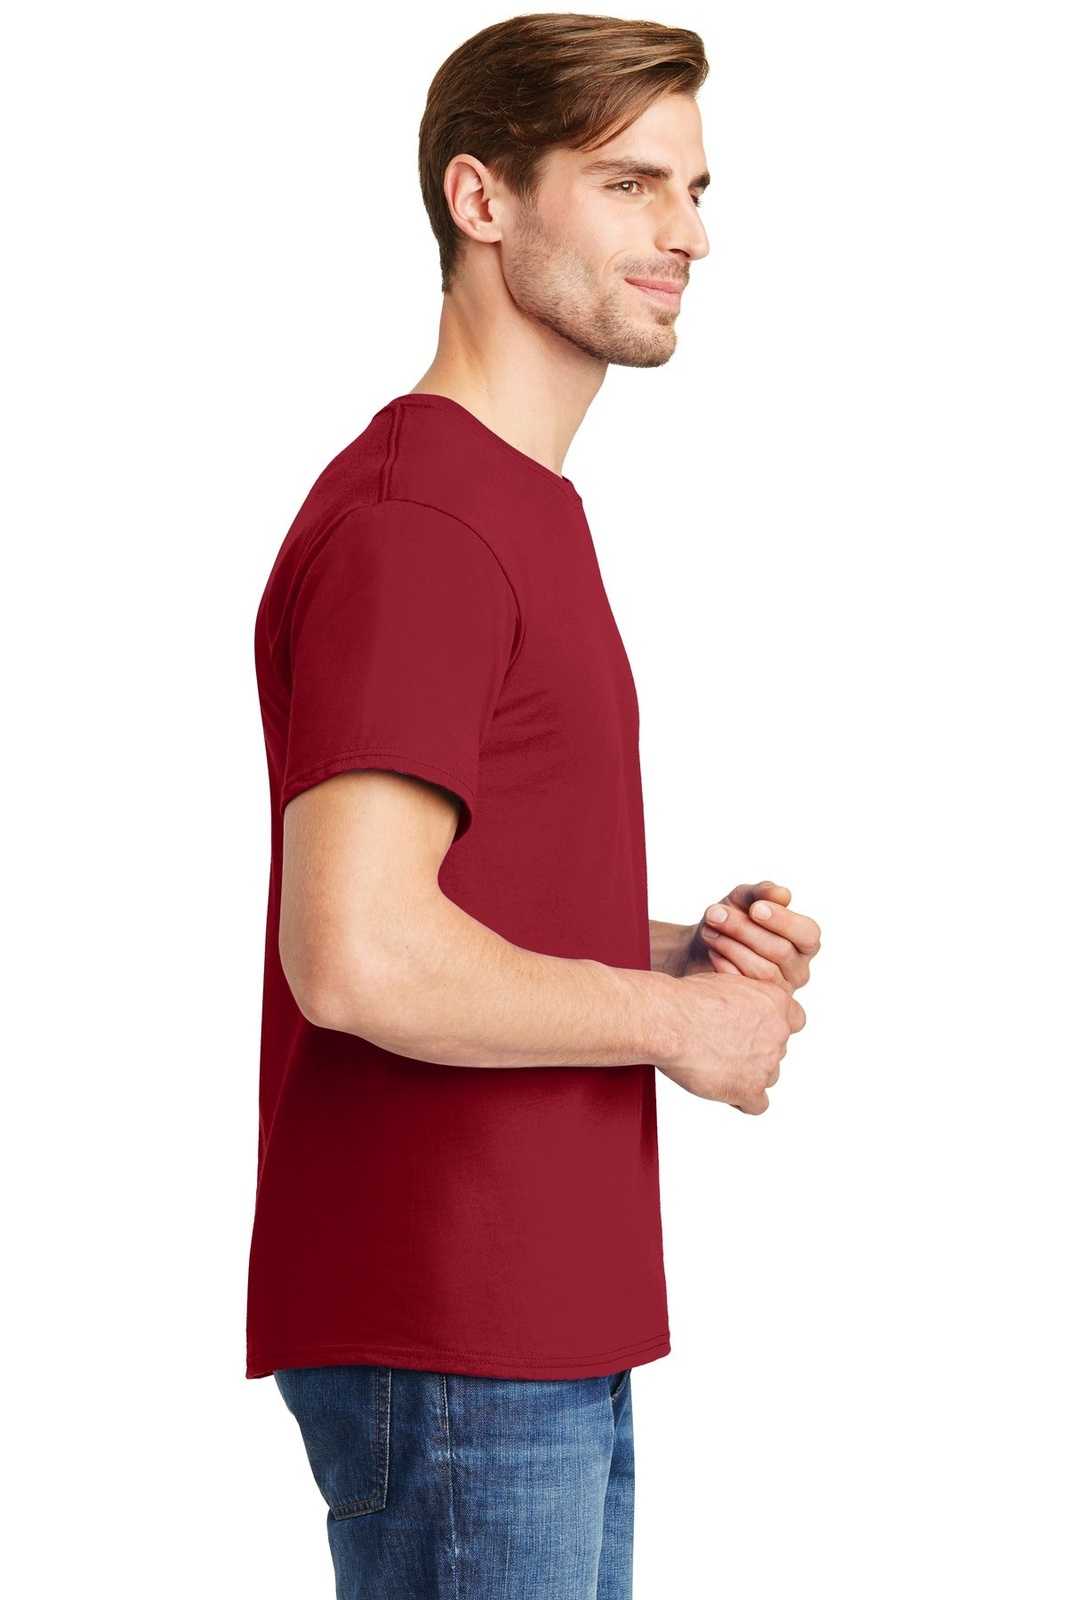 Hanes 5280 Comfortsoft 100% Cotton T-Shirt - Deep Red - HIT a Double